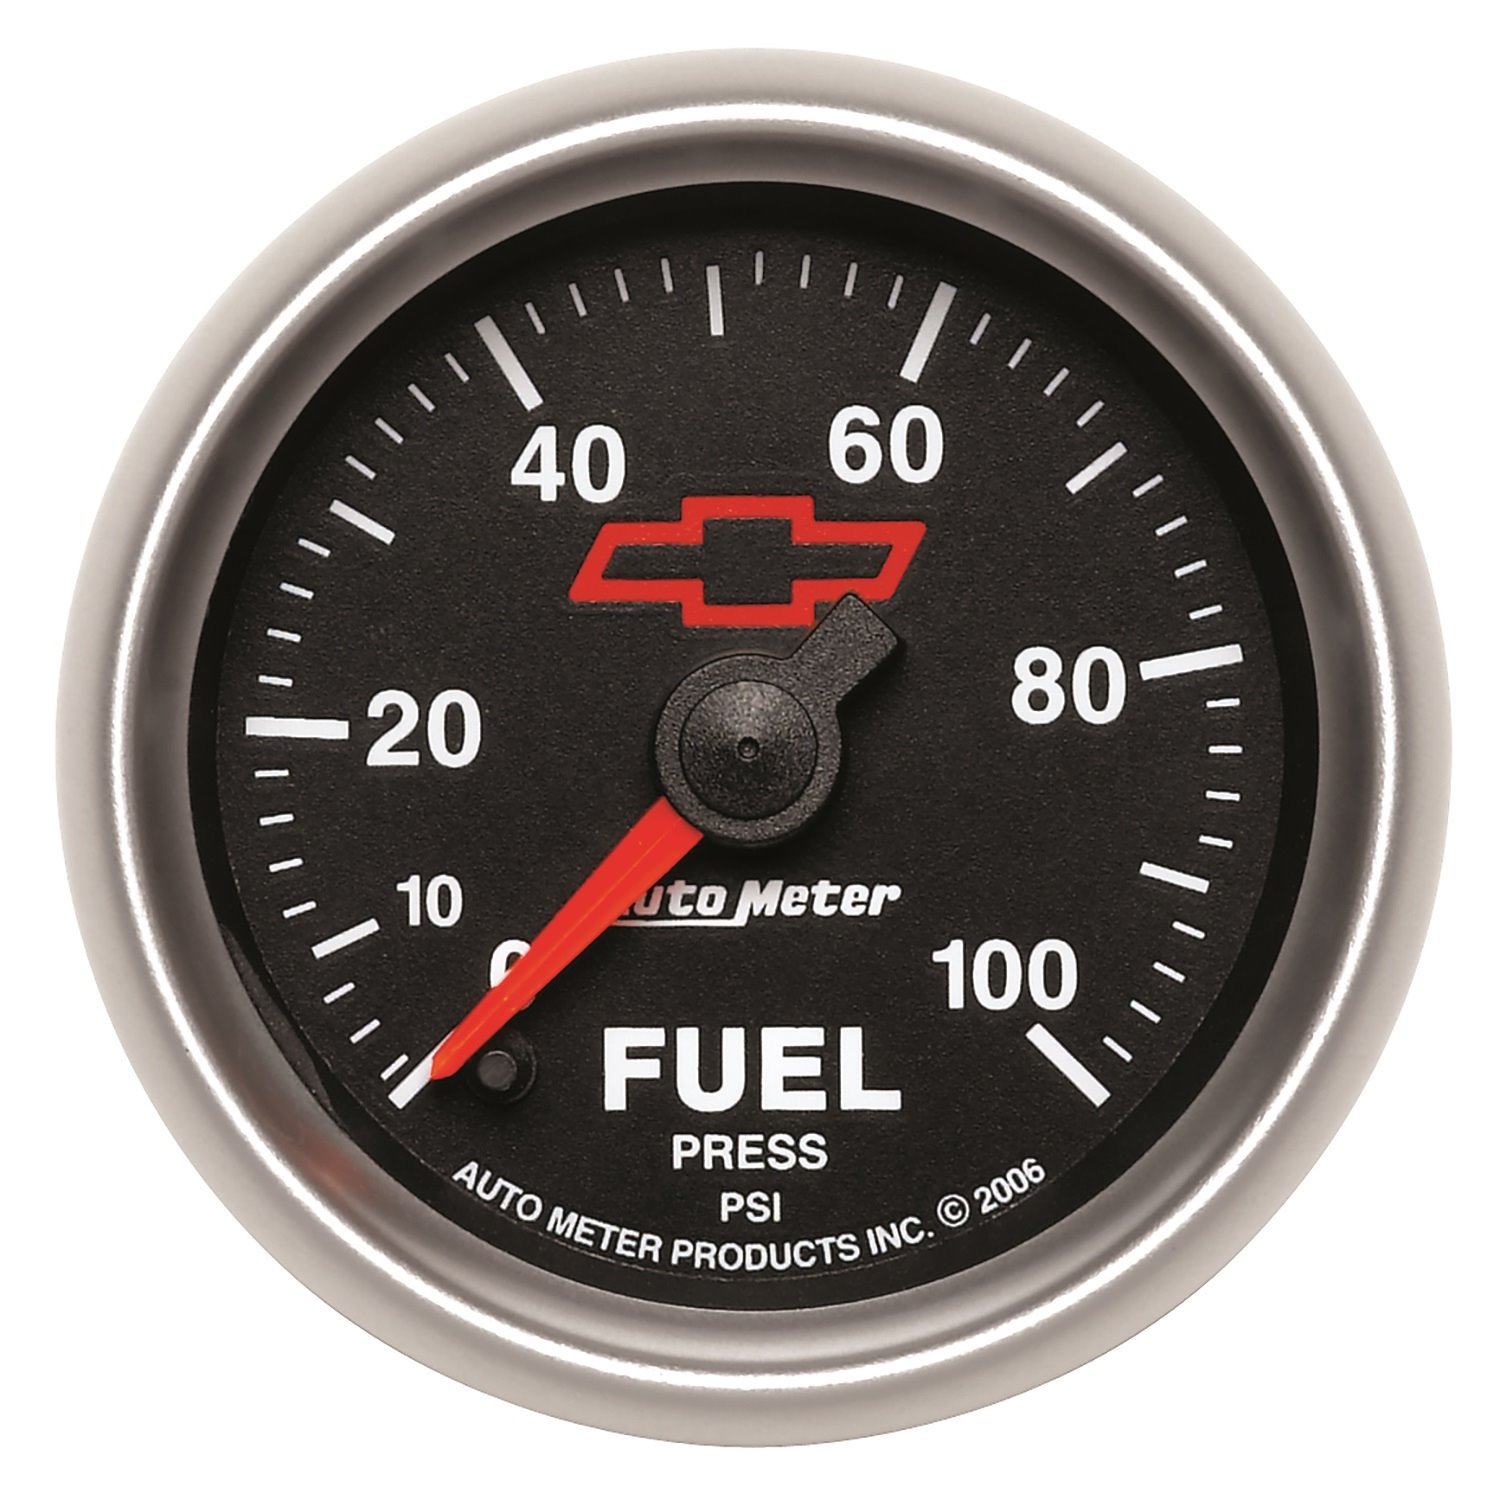 Officially Licensed Chevrolet Performance Tie Fuel Pressure Gauge 2-1/16" Electrical (Full Sweep)